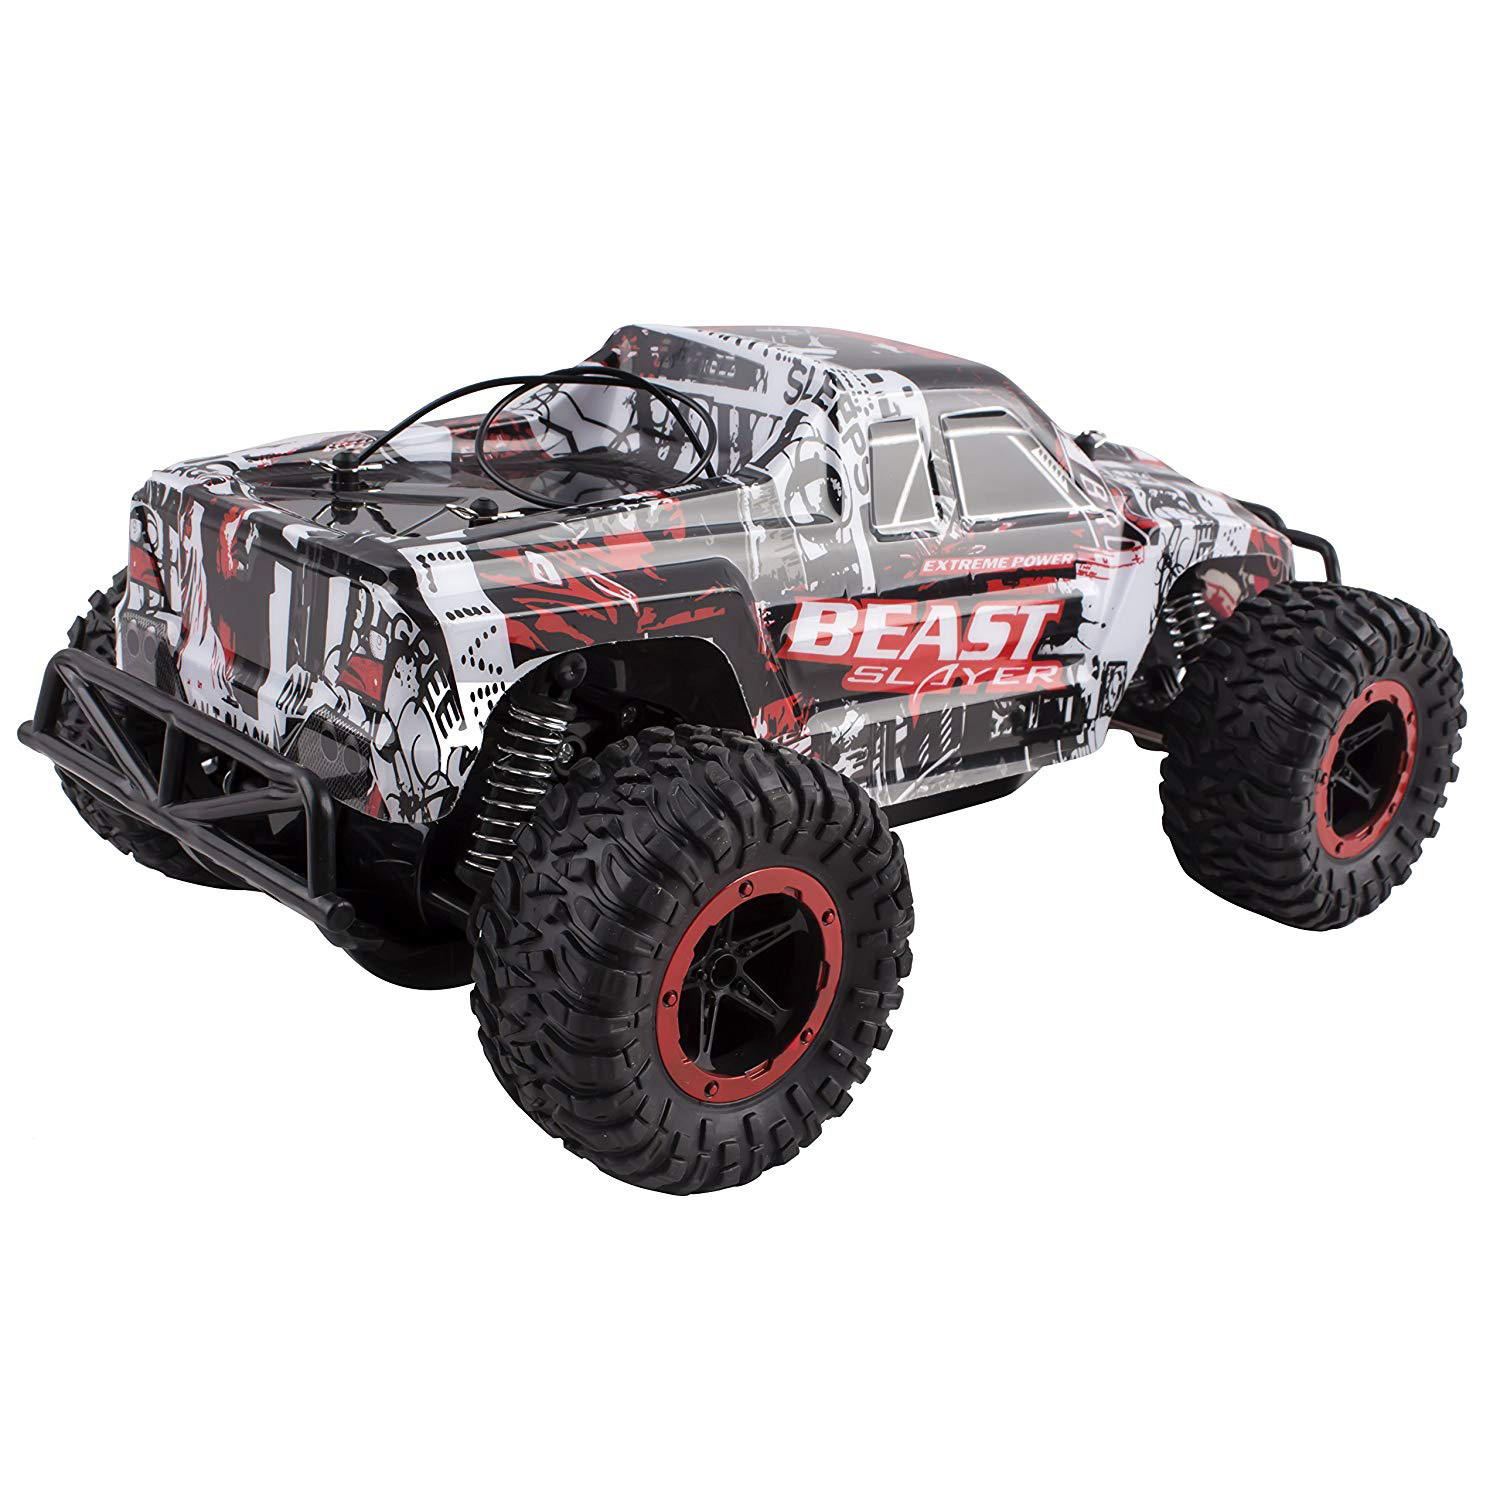 Beast Slayer Truck Removable Body Remote Control Turbo RC Buggy Car Large 1:16 Scale Size RTR With Working Suspension, High Speed, Radio Control Off-Road Hobby Truggy Rechargeable (Red)